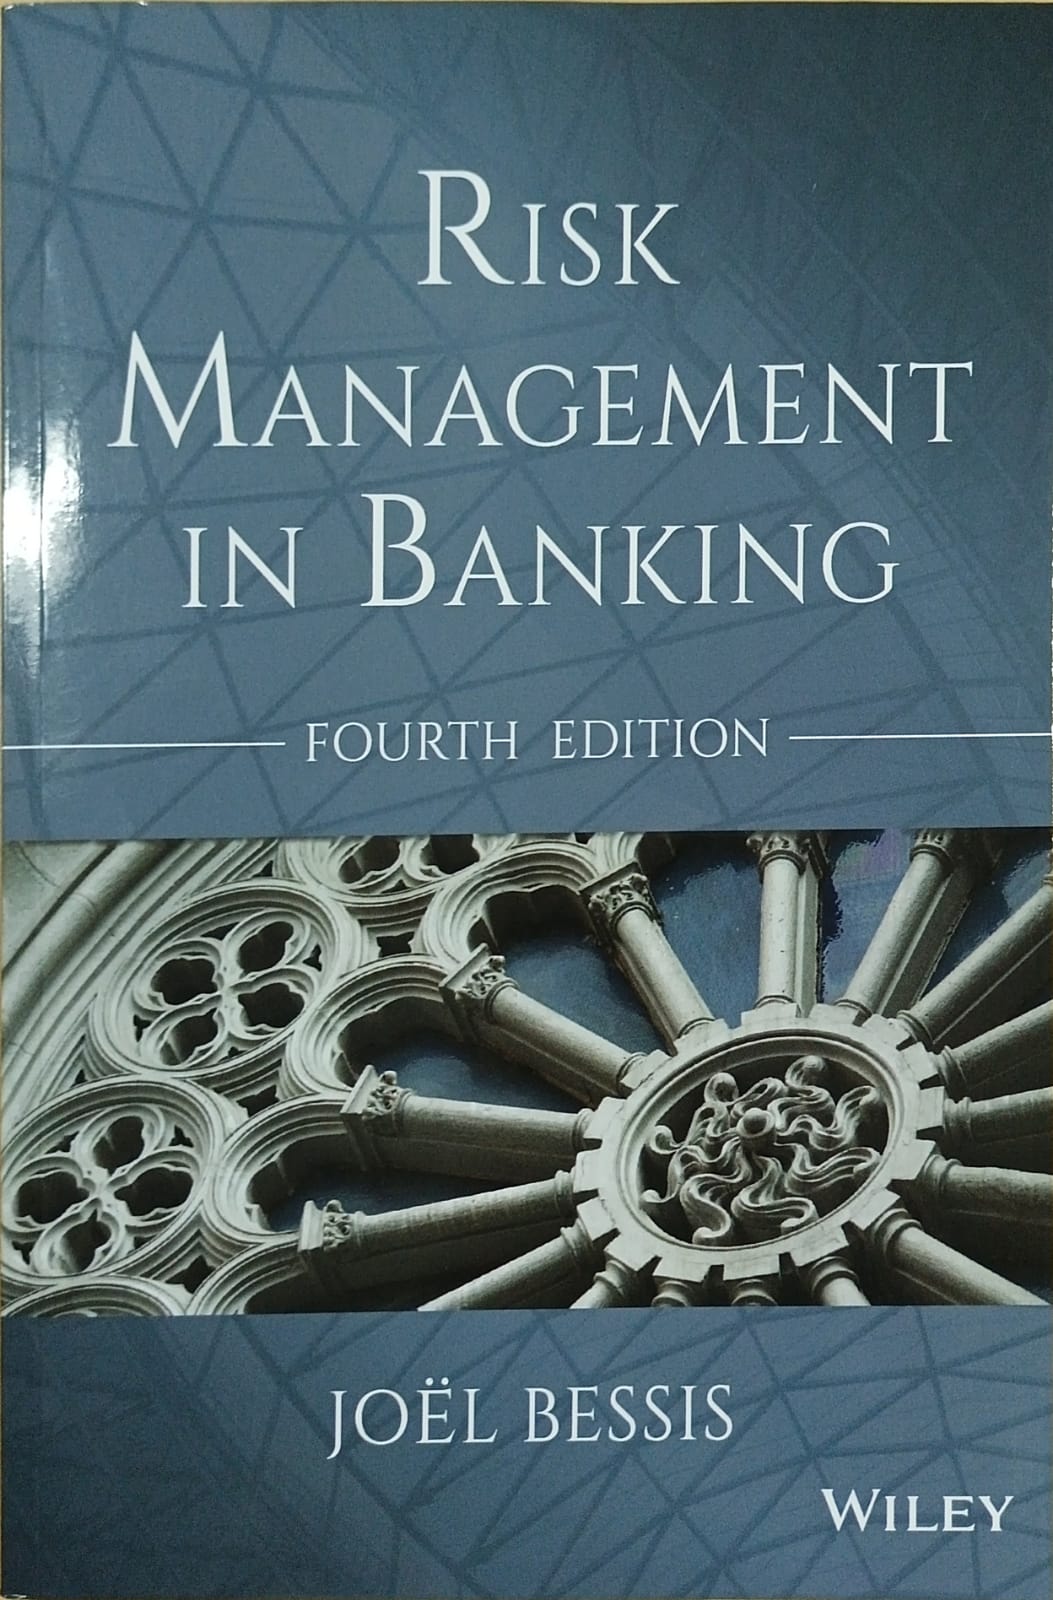 Risk management in banking 4th edition